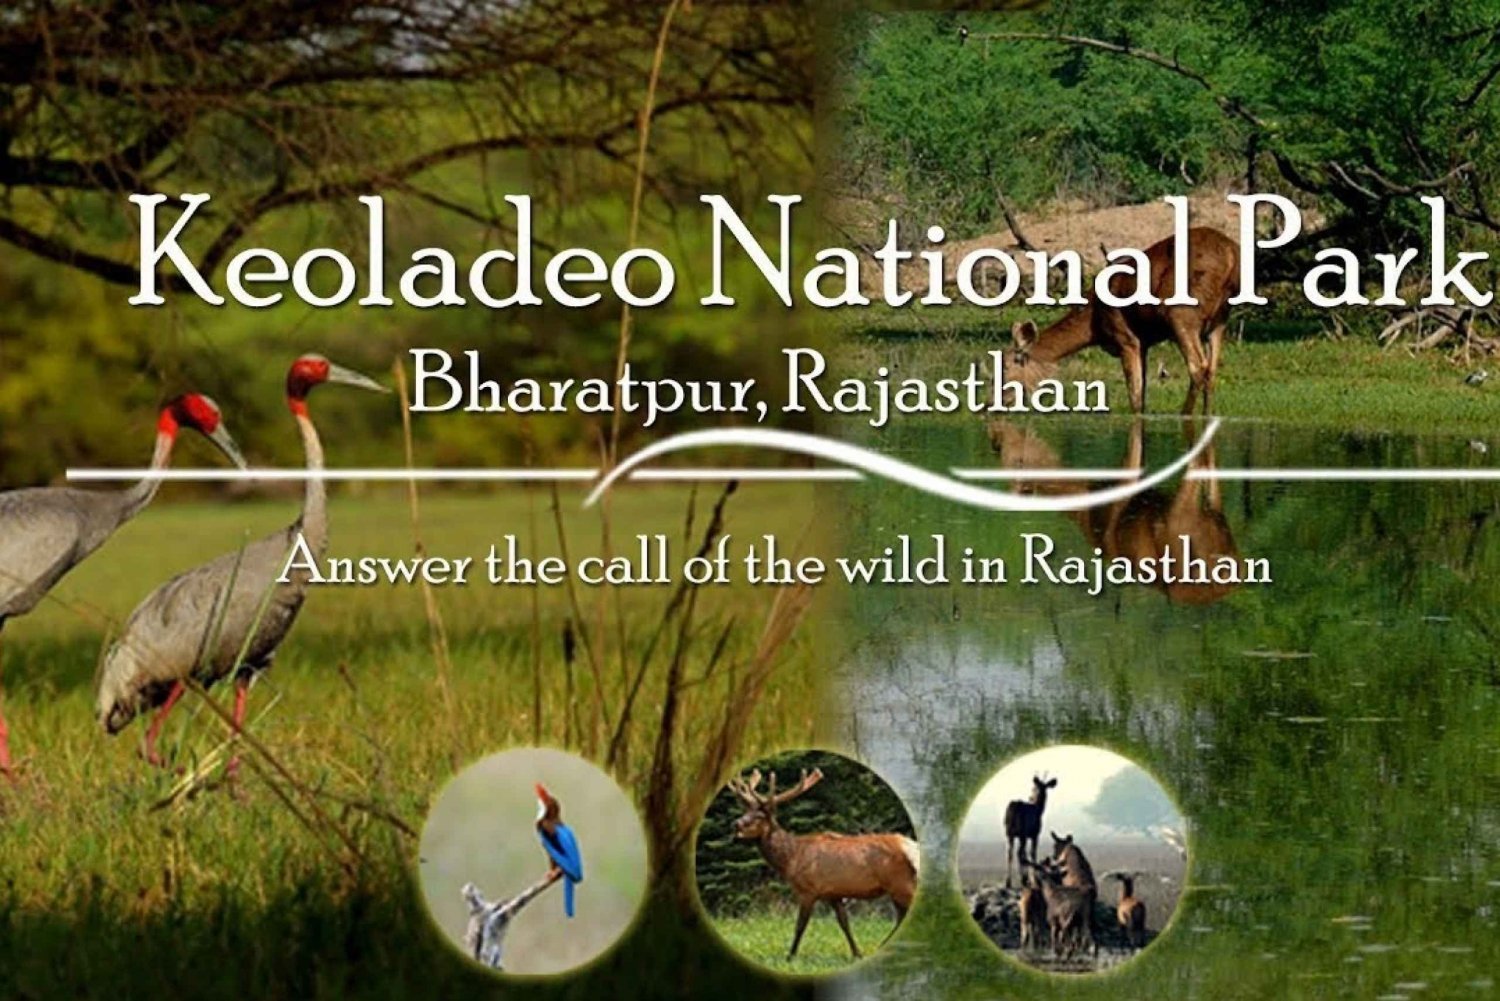 Day tour from Jaipur in Keoladeo National Park (Bharatpur)